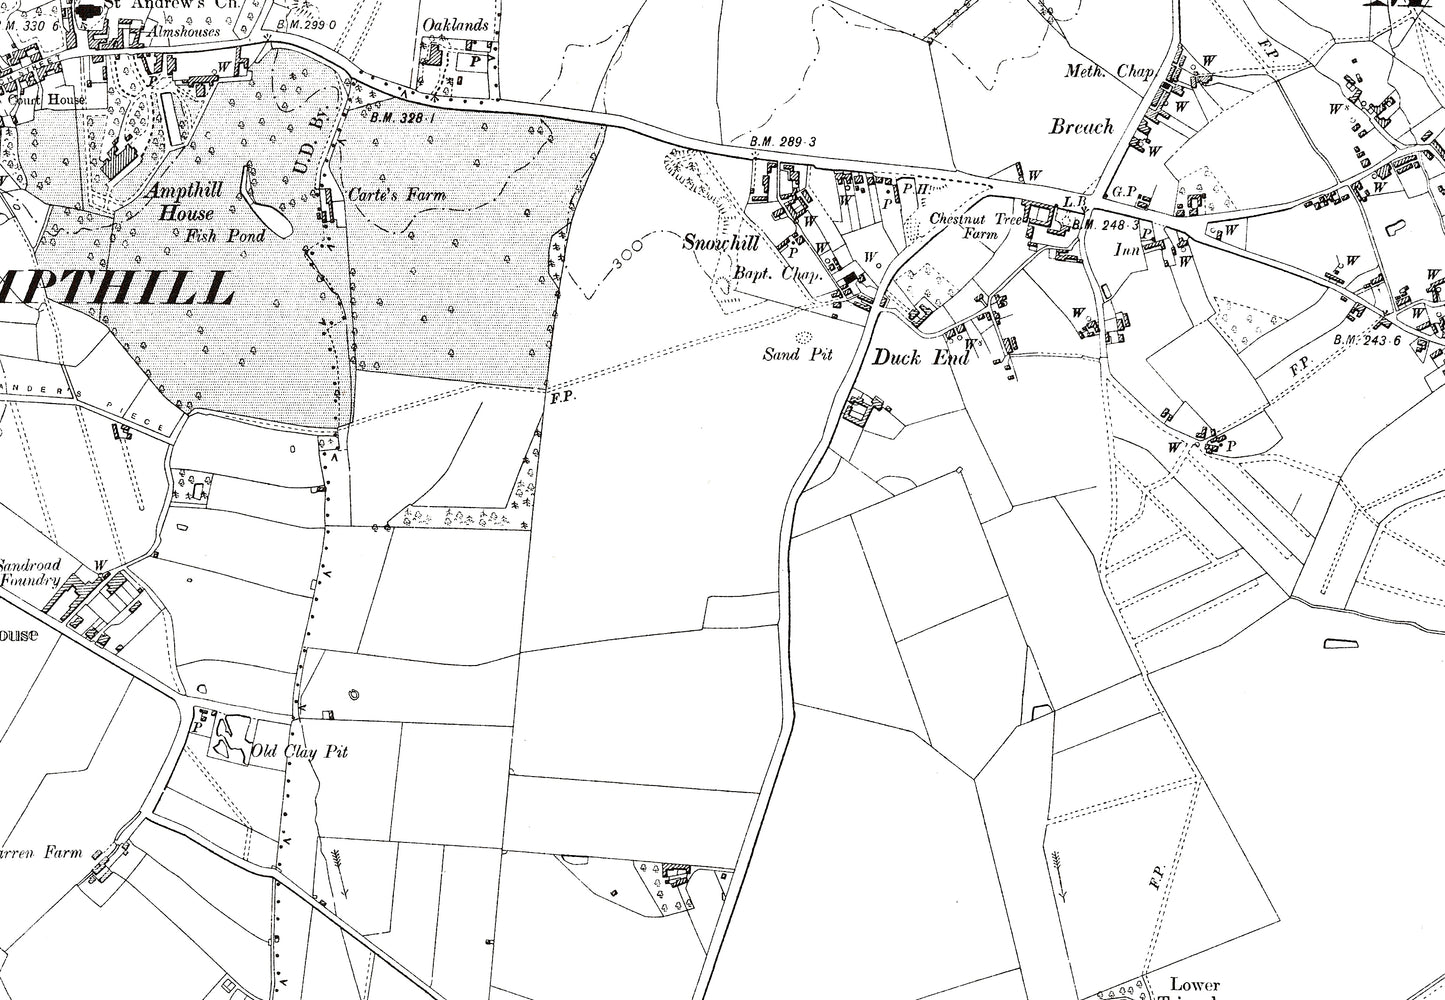 A 1902 map showing Ampthill and Maulden in Bedfordshire - A Digital Download 0f OS 1:10560 scale map, Beds 21SE